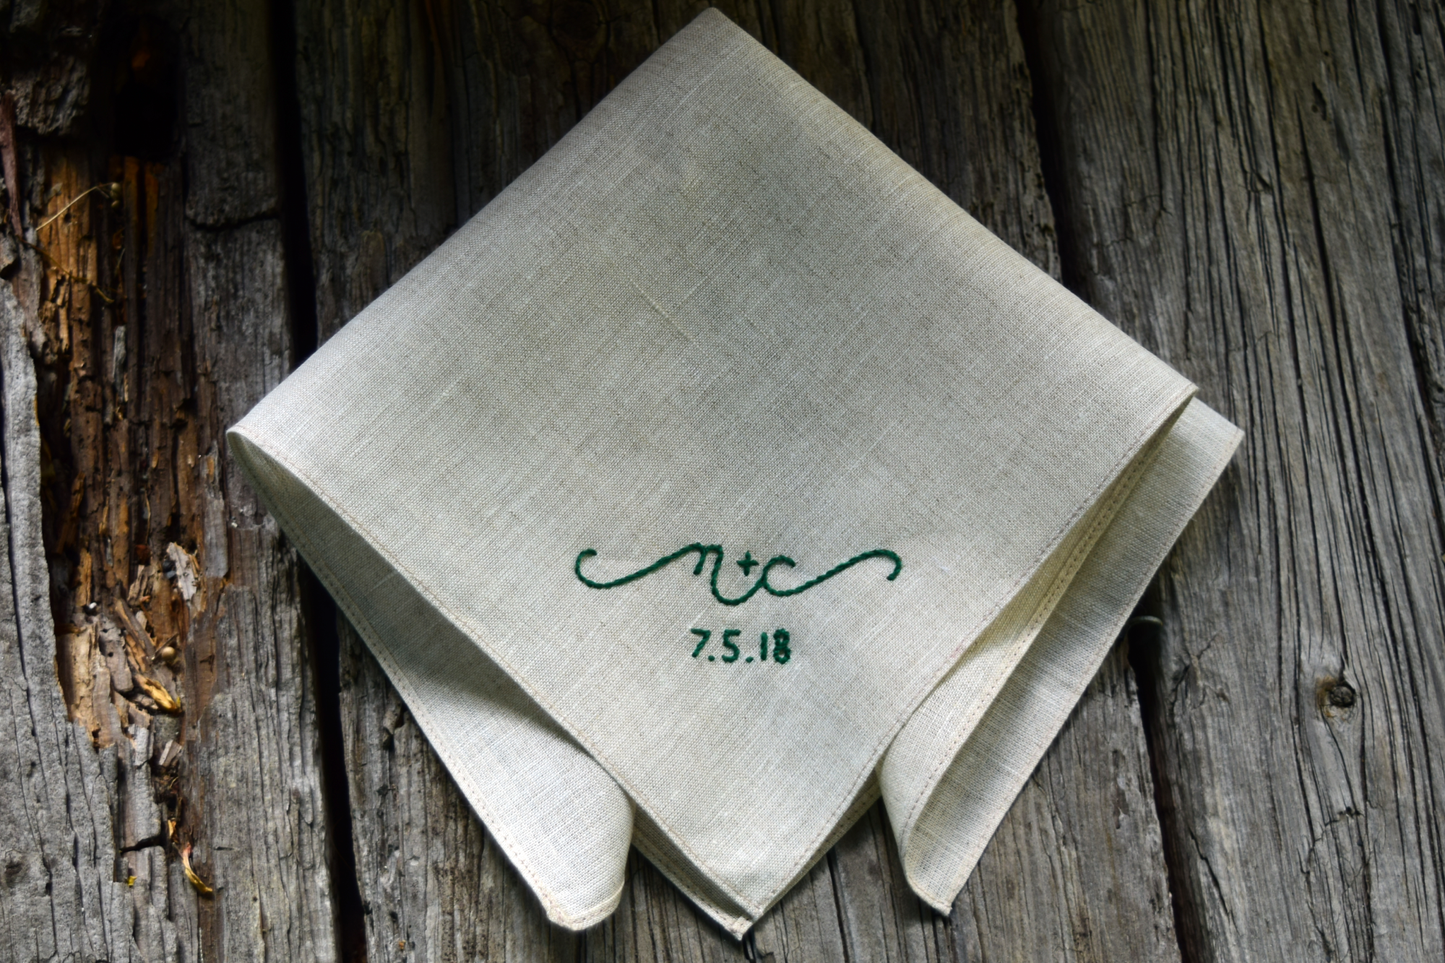 Oatmeal linen handkerchief hand embroidered with 'n + c, 7.5.18' in emerald green